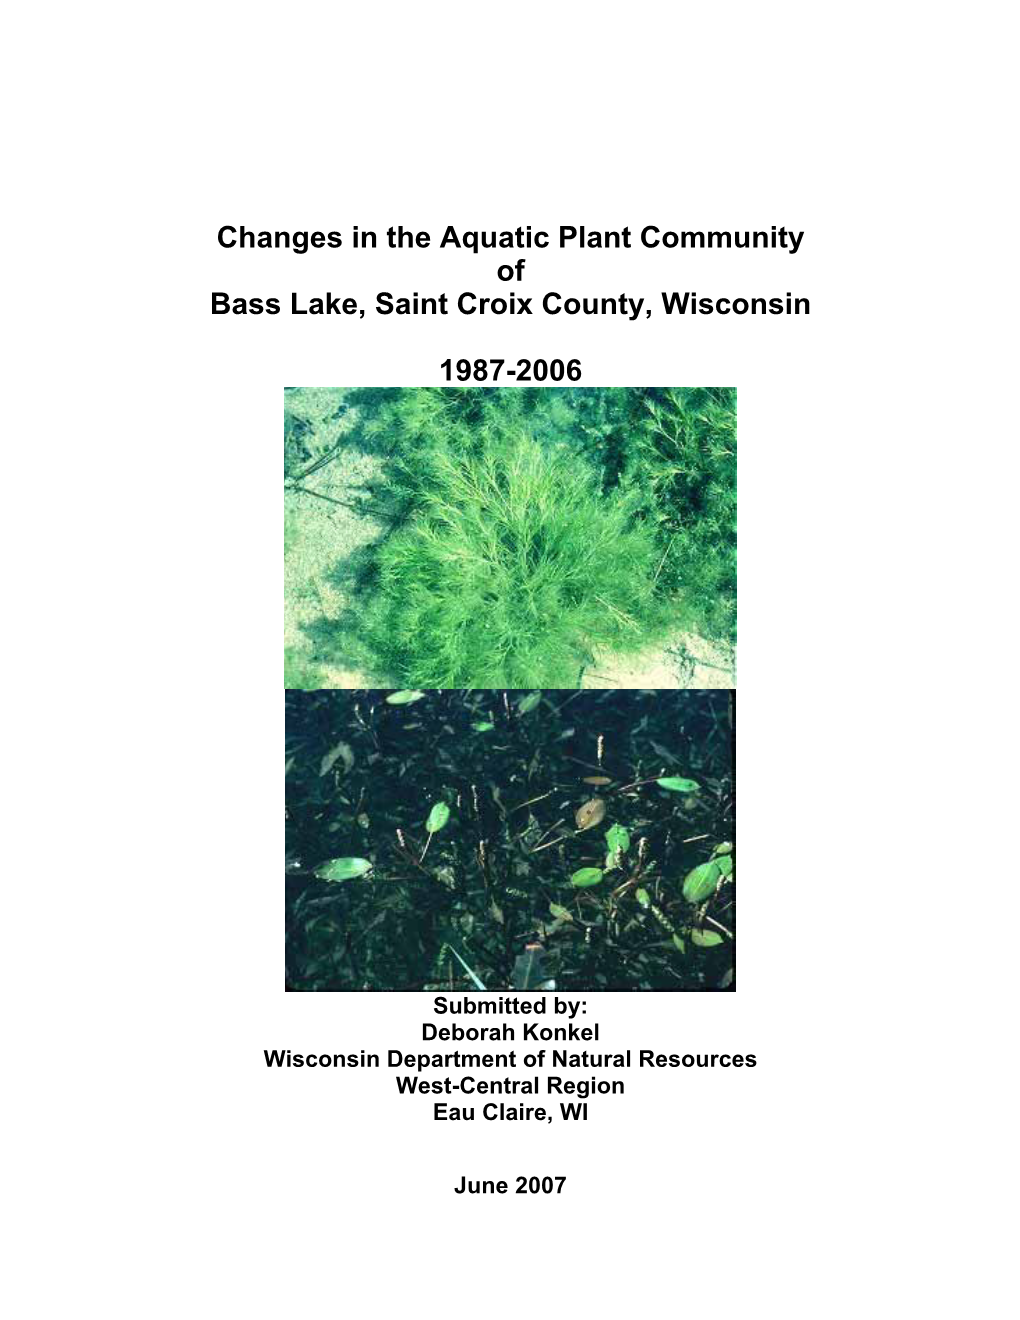 Changes in the Aquatic Plant Community of Bass Lake, Saint Croix County, Wisconsin